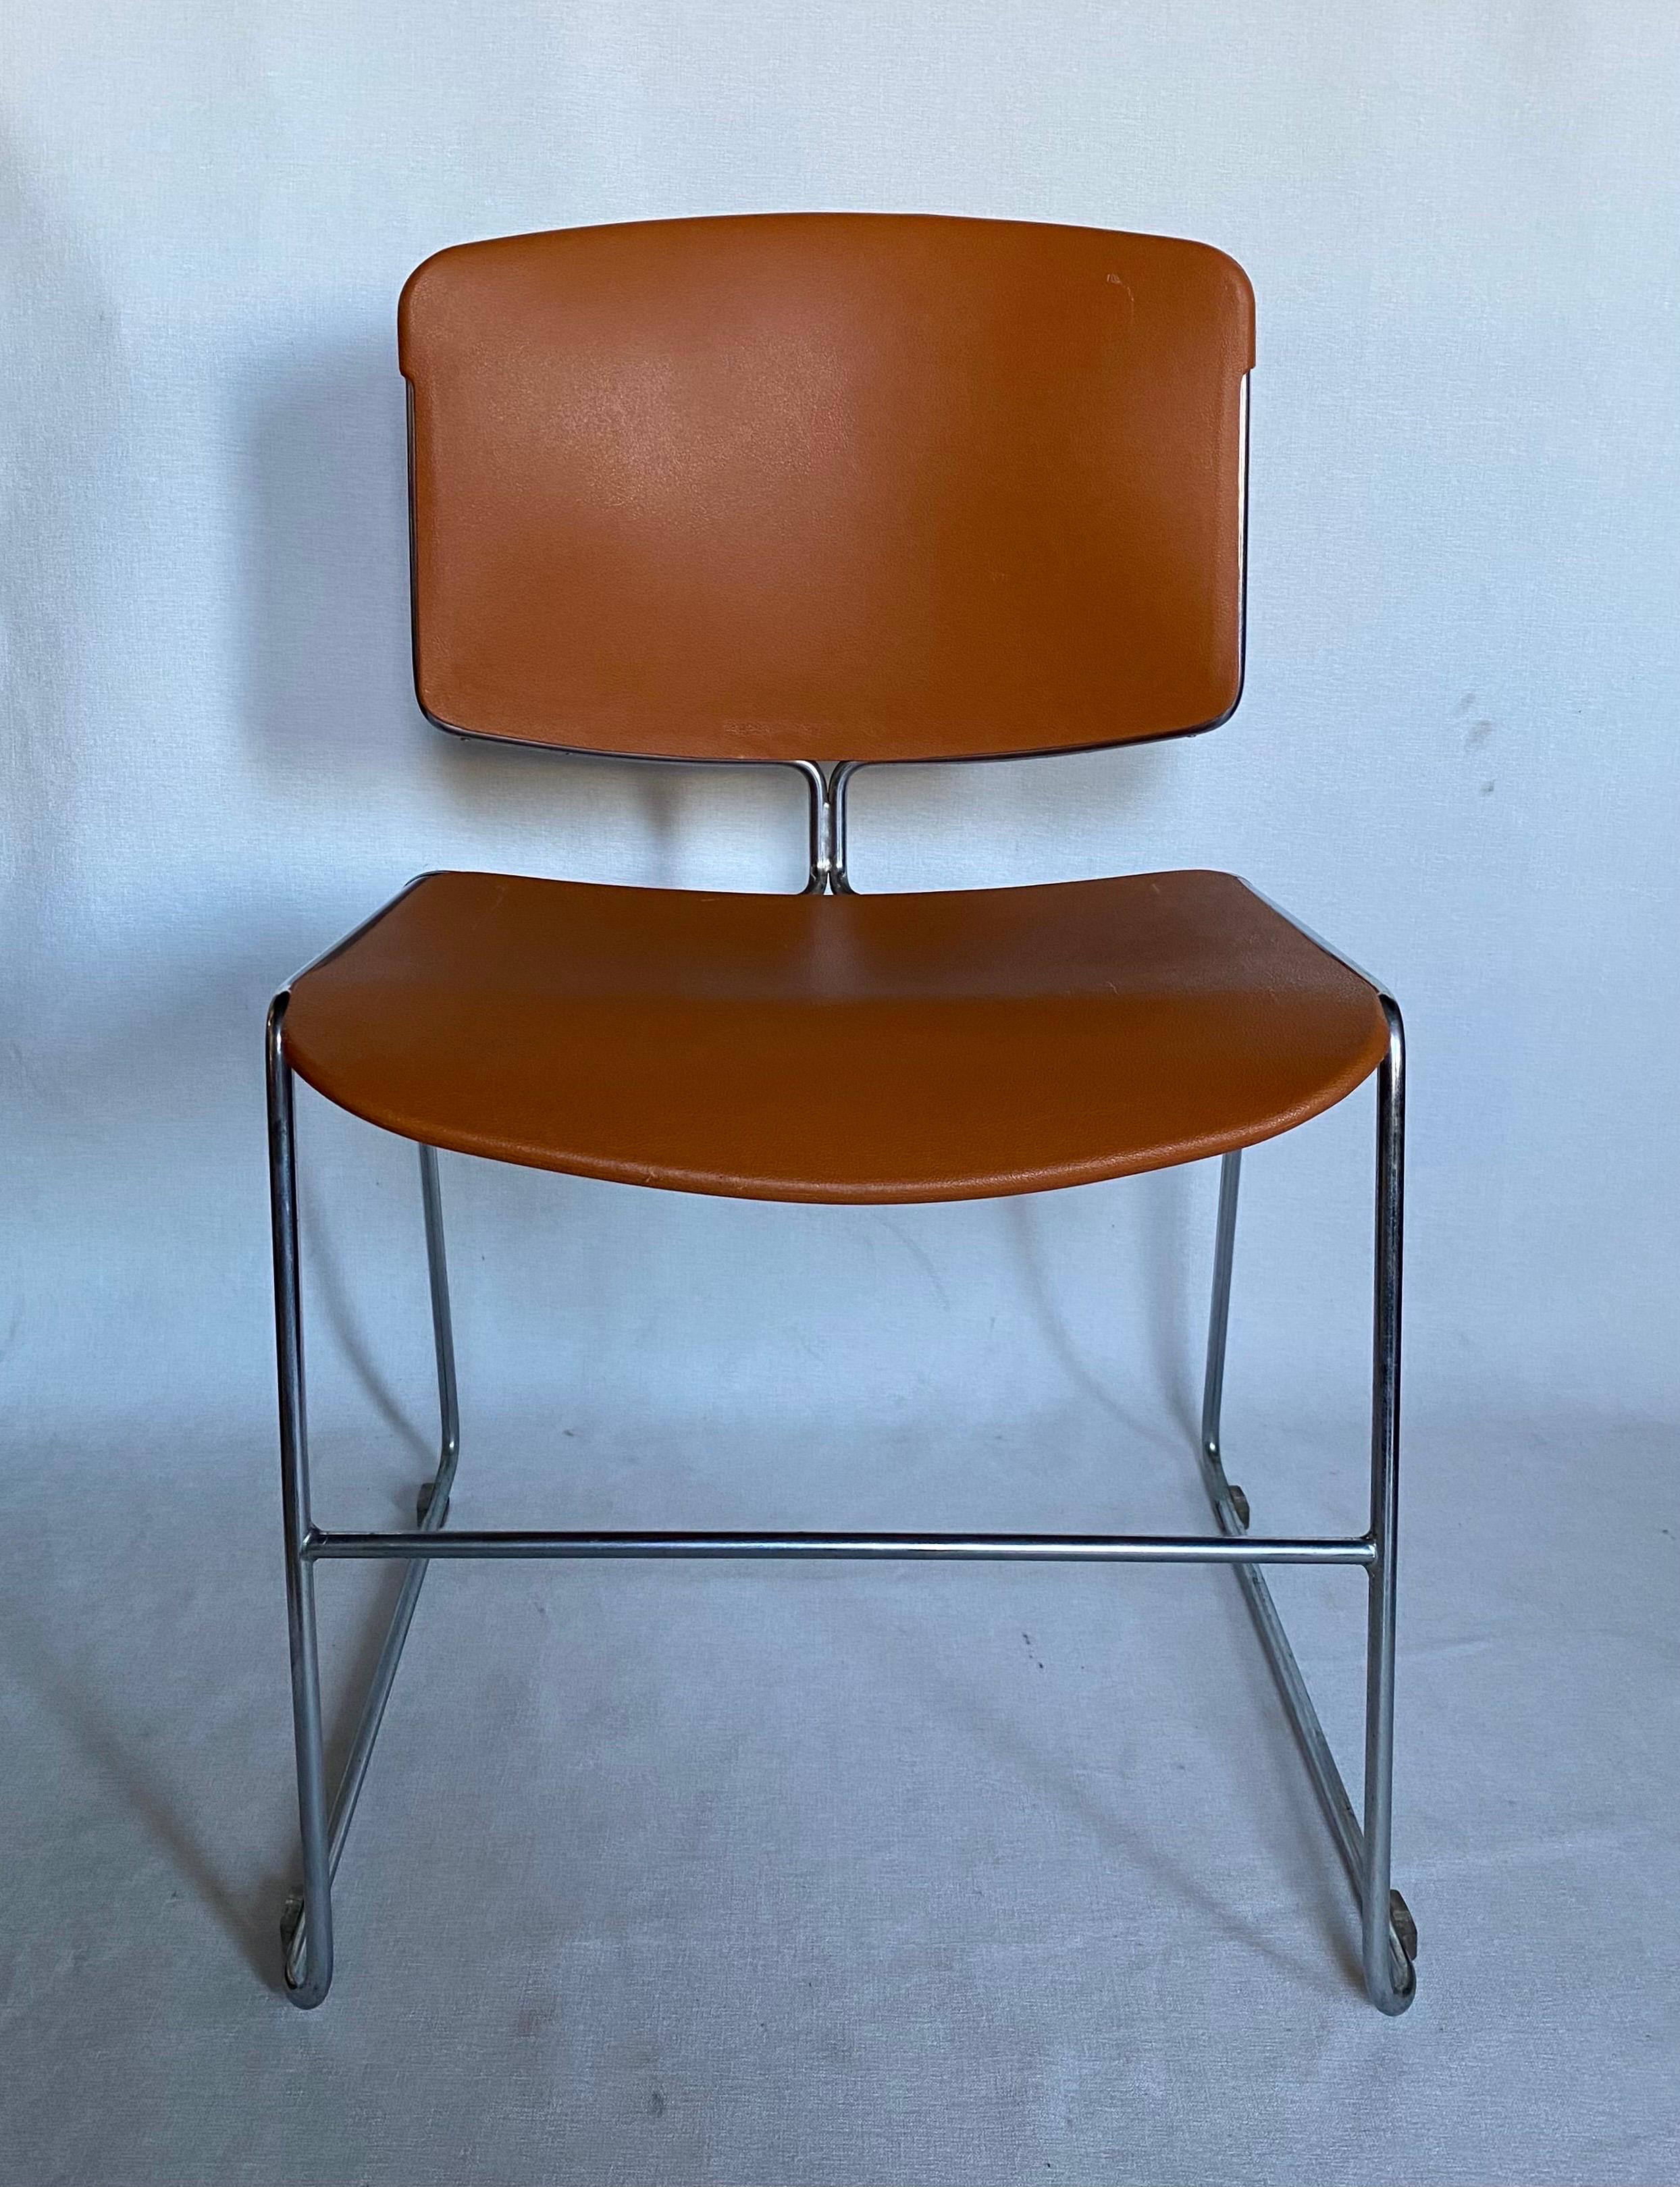 Mid-Century Modern Max Max-Stacker office conference room chairs by Steelcase in iconic orange. These comfortable lounge or desk chairs feature molded curved seats and backs with polished chrome tubular frames. From the conference room to the dining